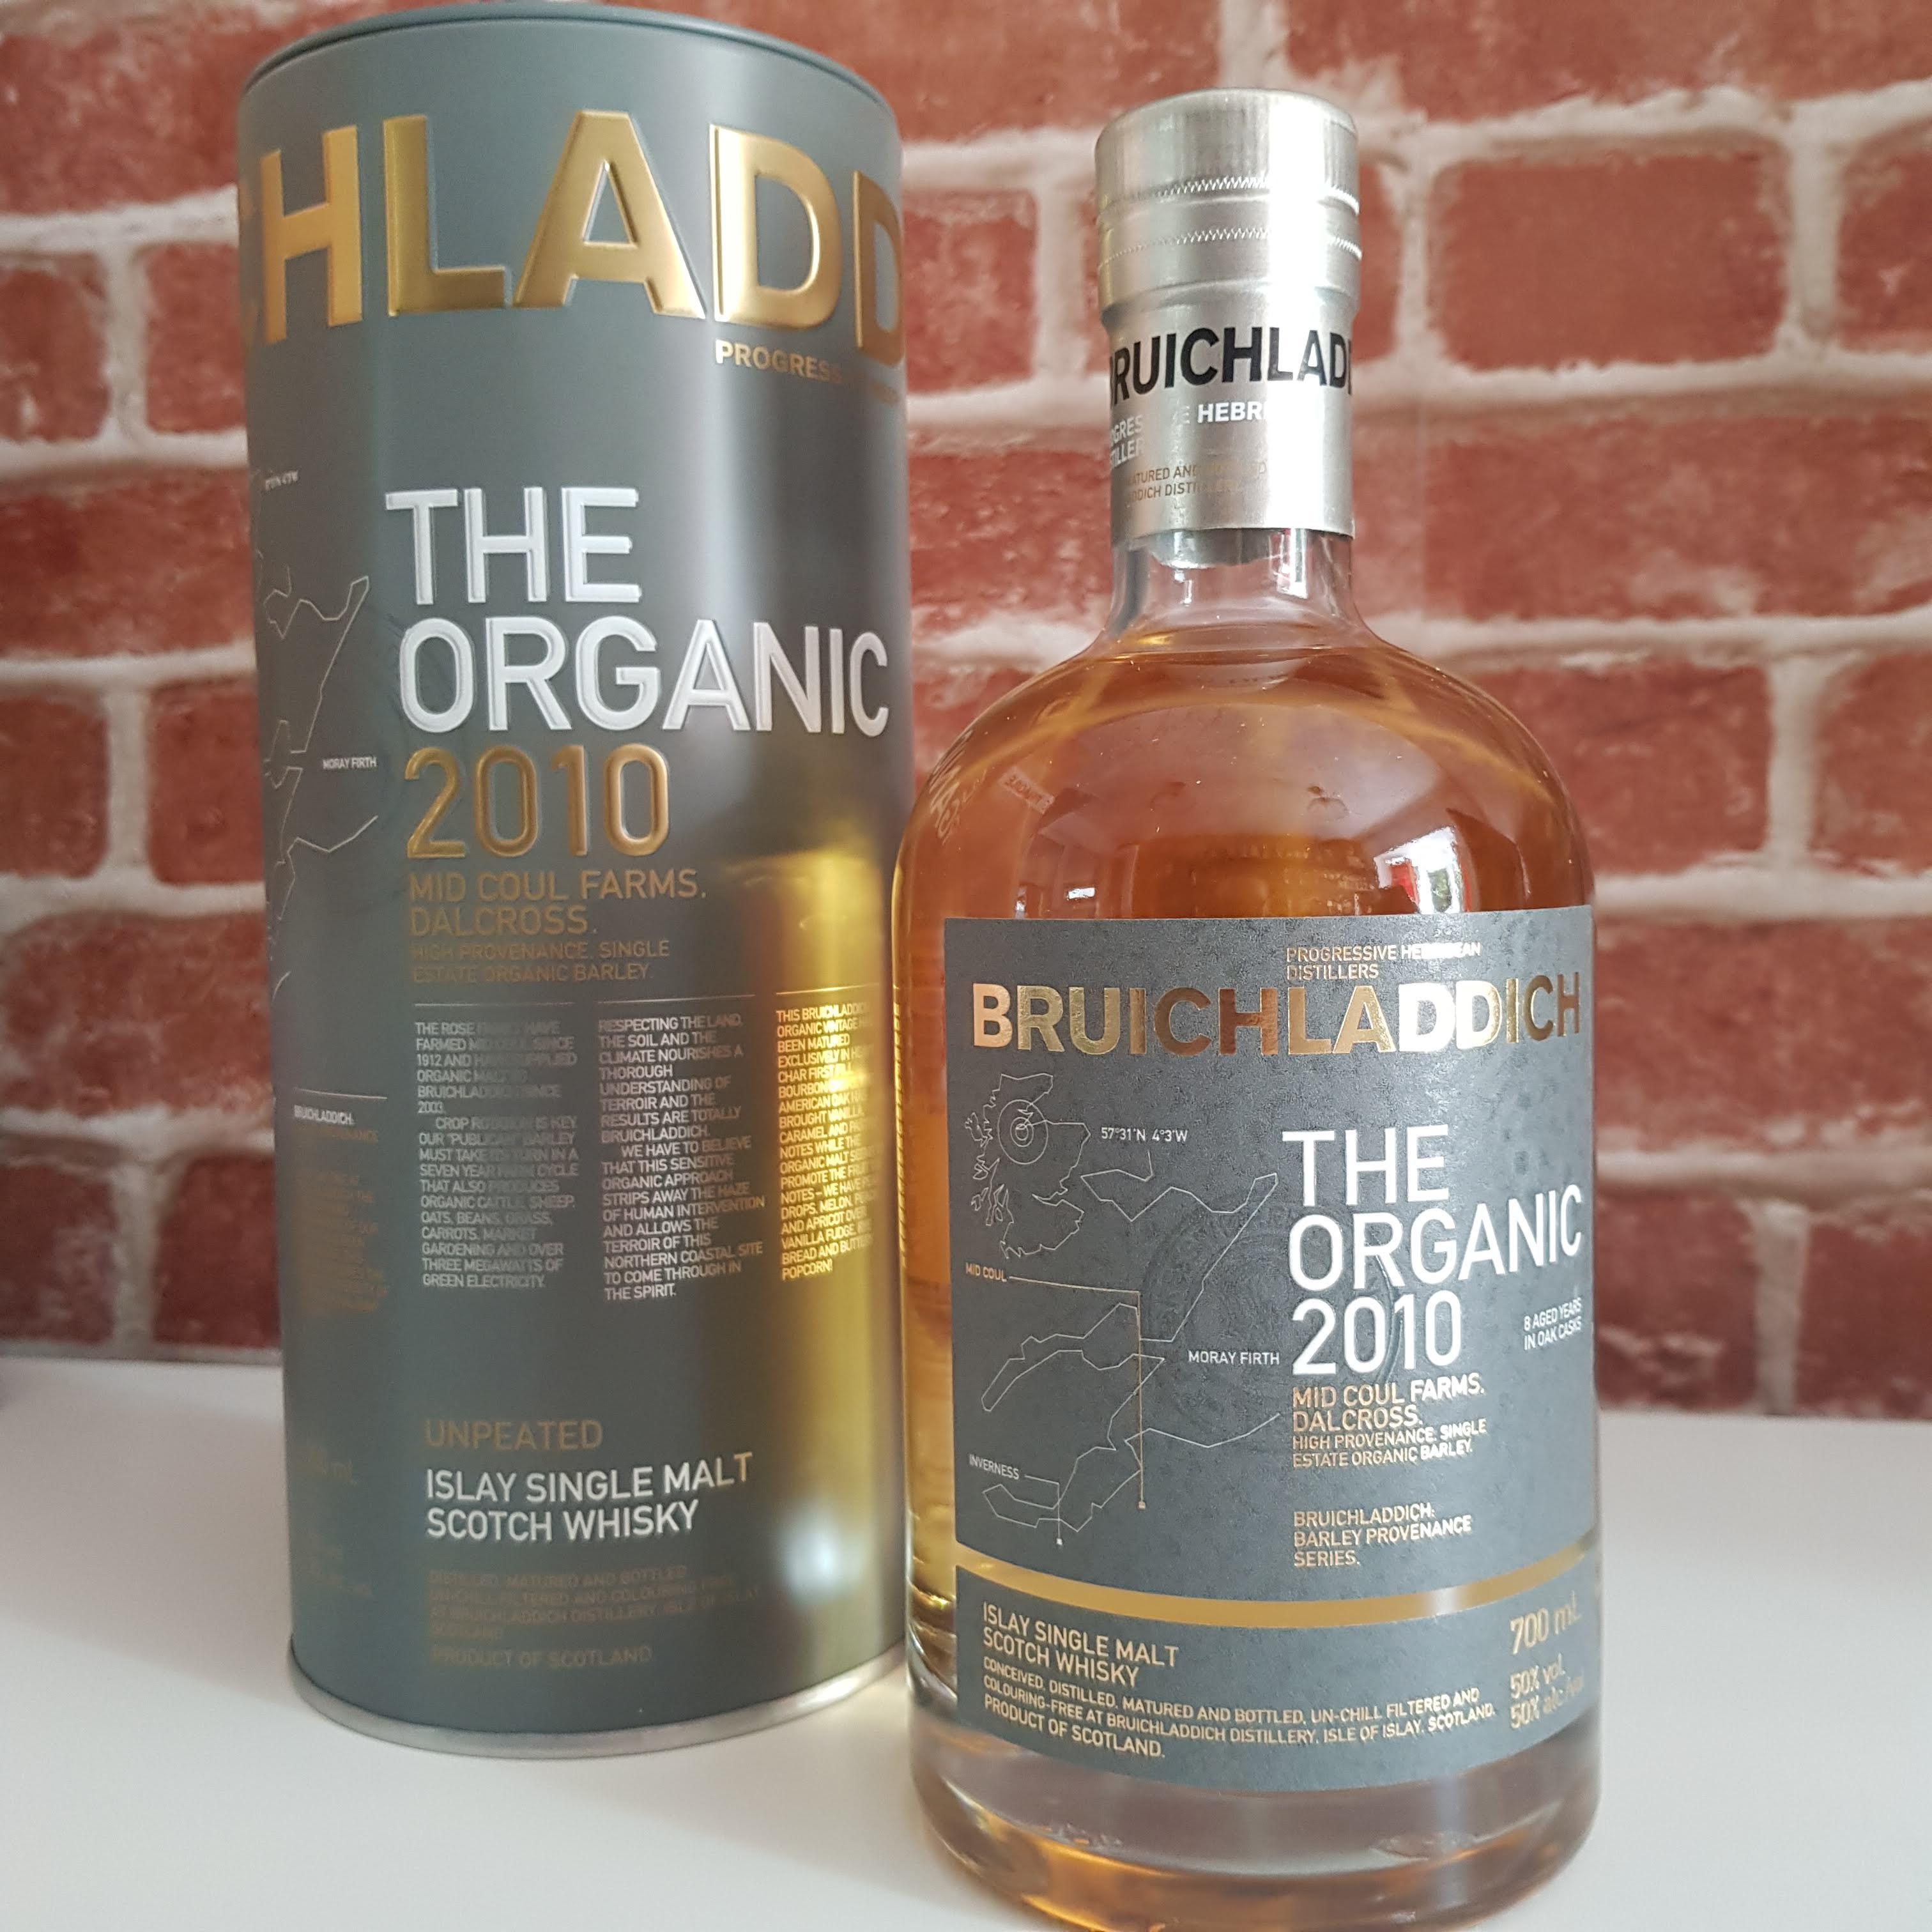 Bruichladdich The Organic 2010 Scotch Whisky Review